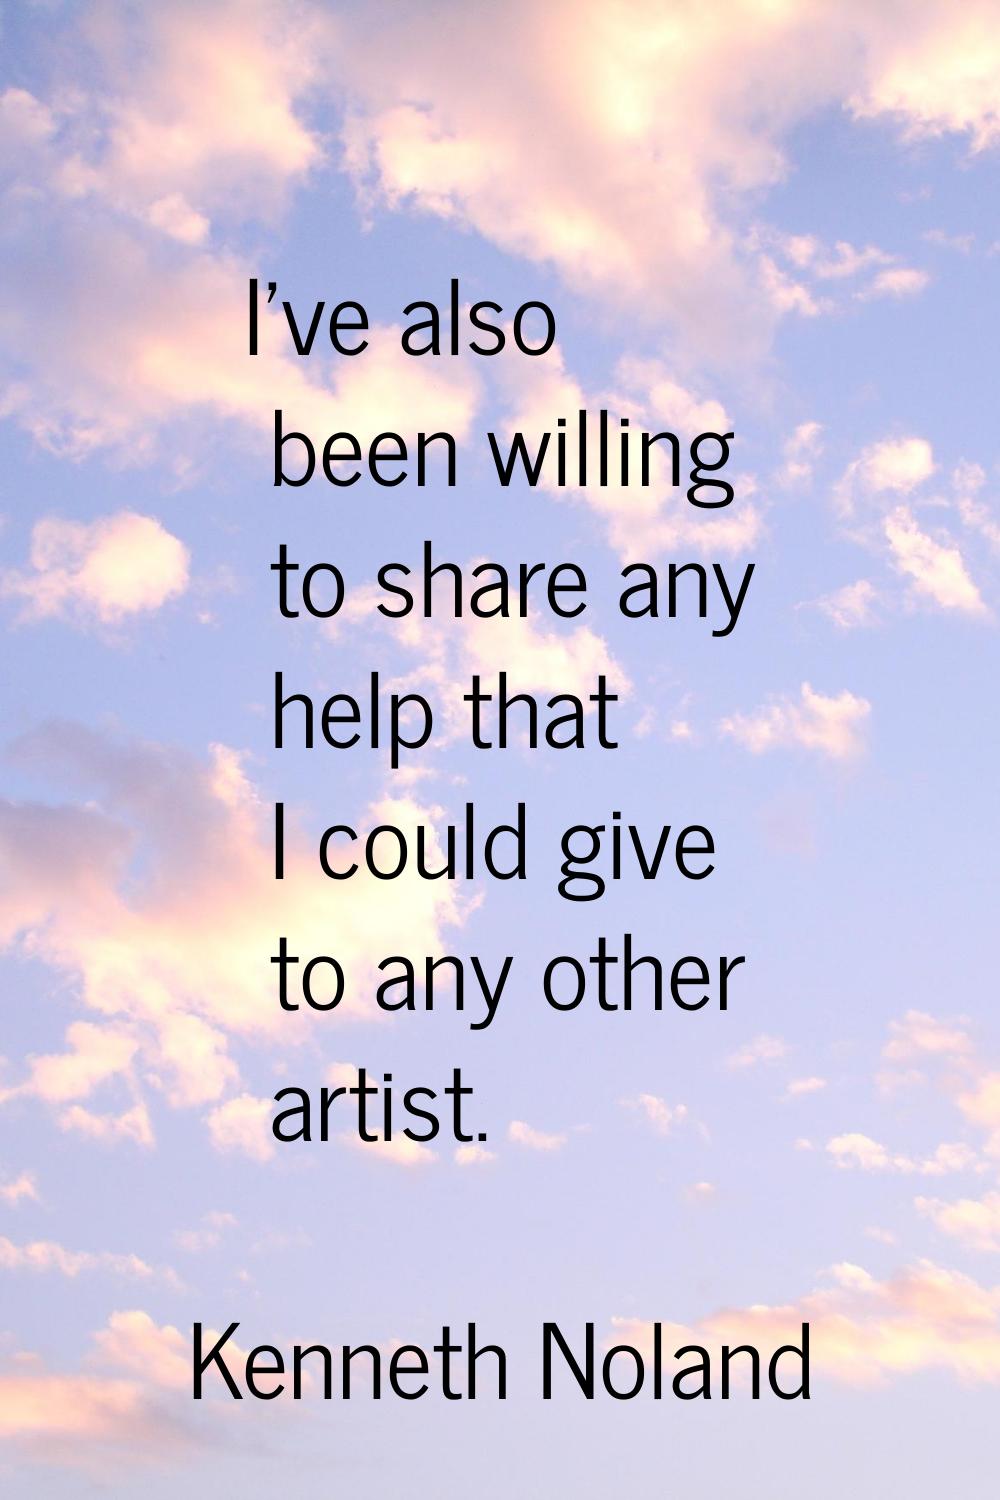 I've also been willing to share any help that I could give to any other artist.